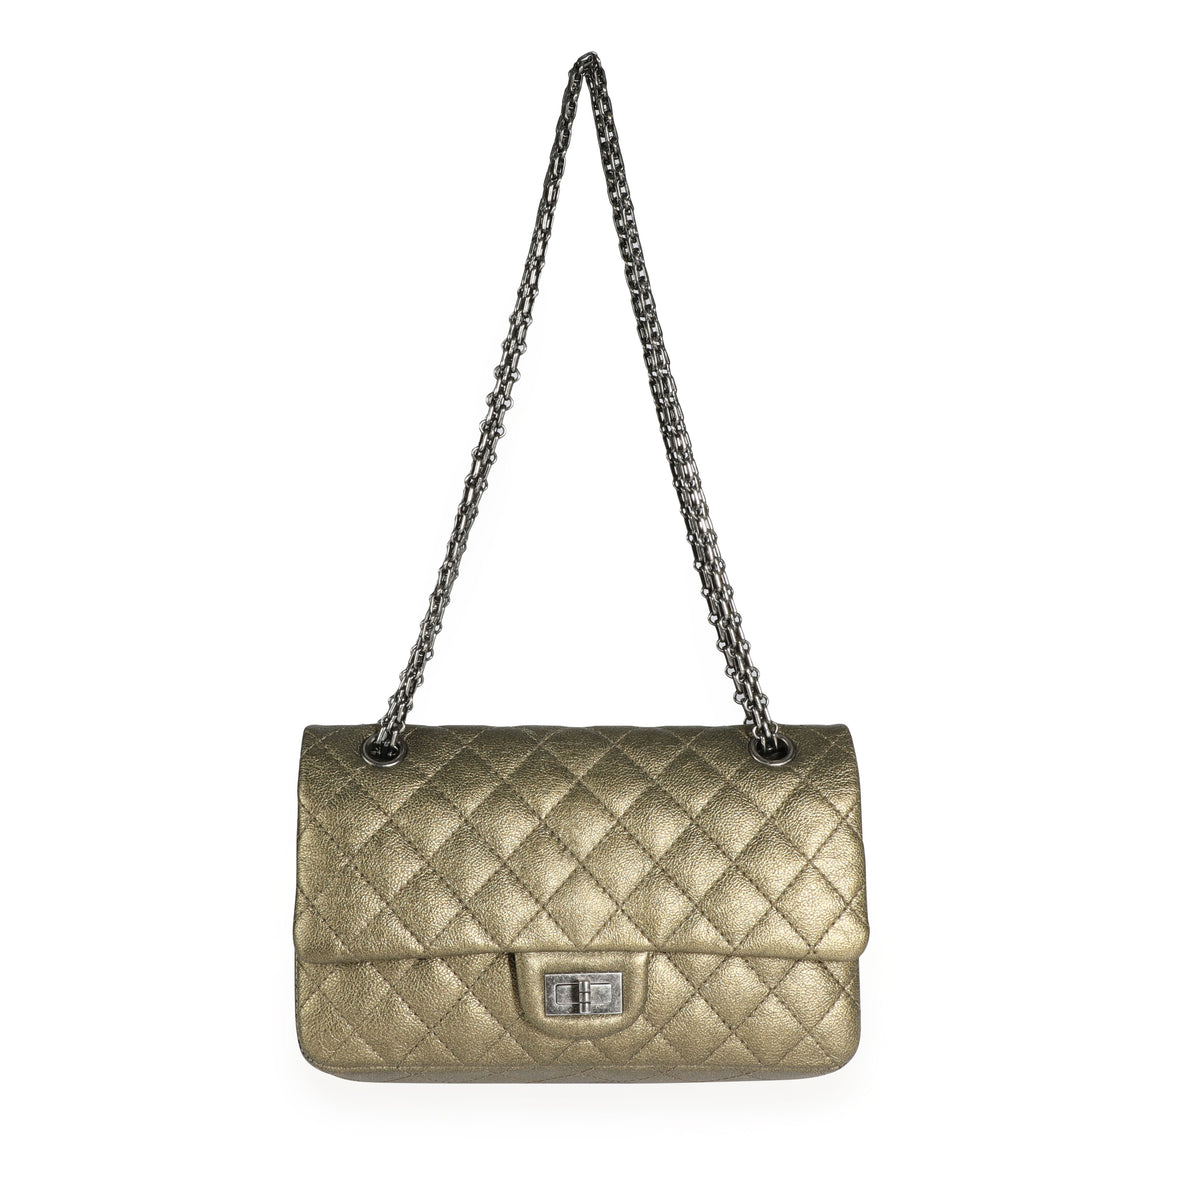 Chanel White Calfskin Quilted Leather Mini Pearl Crush Flap Bag